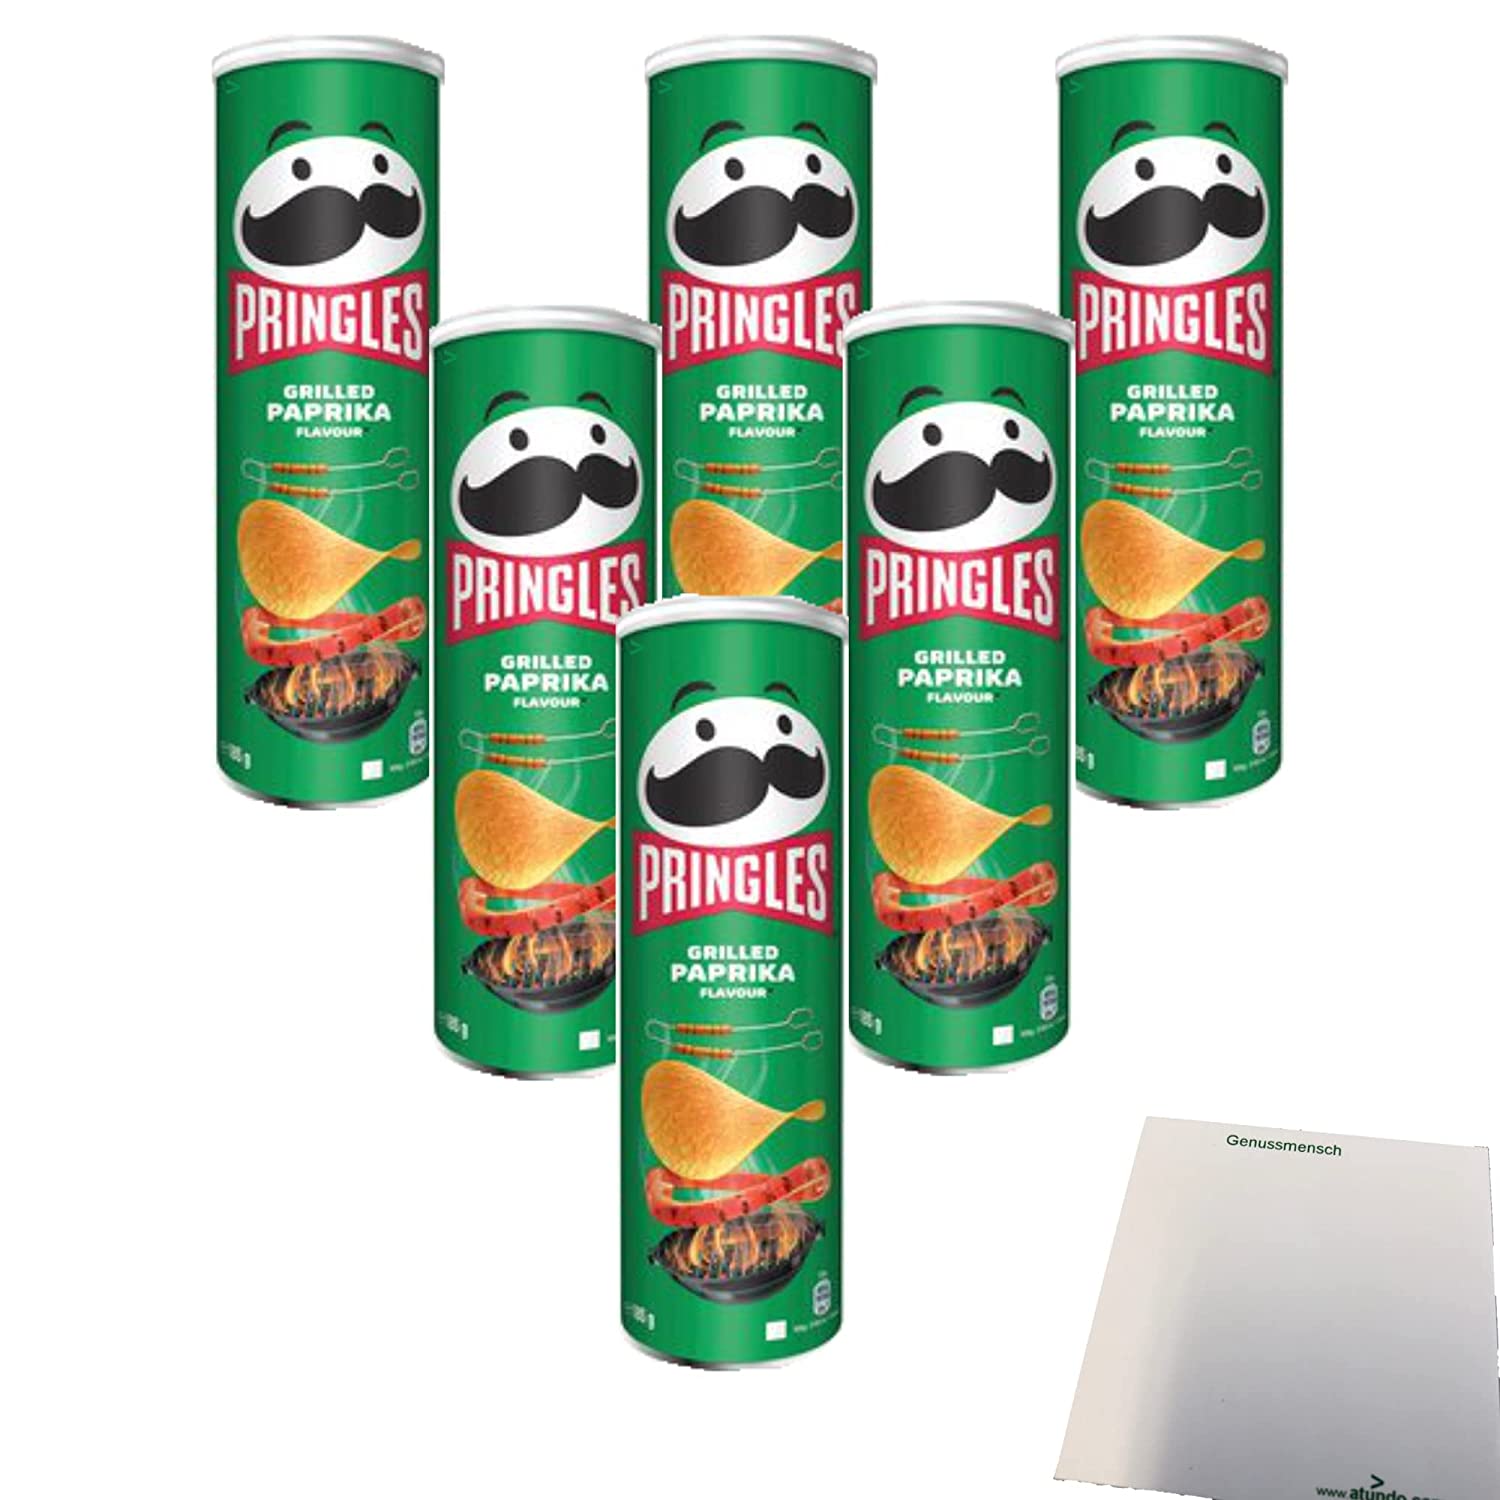 Pringles Grilled Paprika Flavour 6er Pack (6x185g Packung) + usy Block